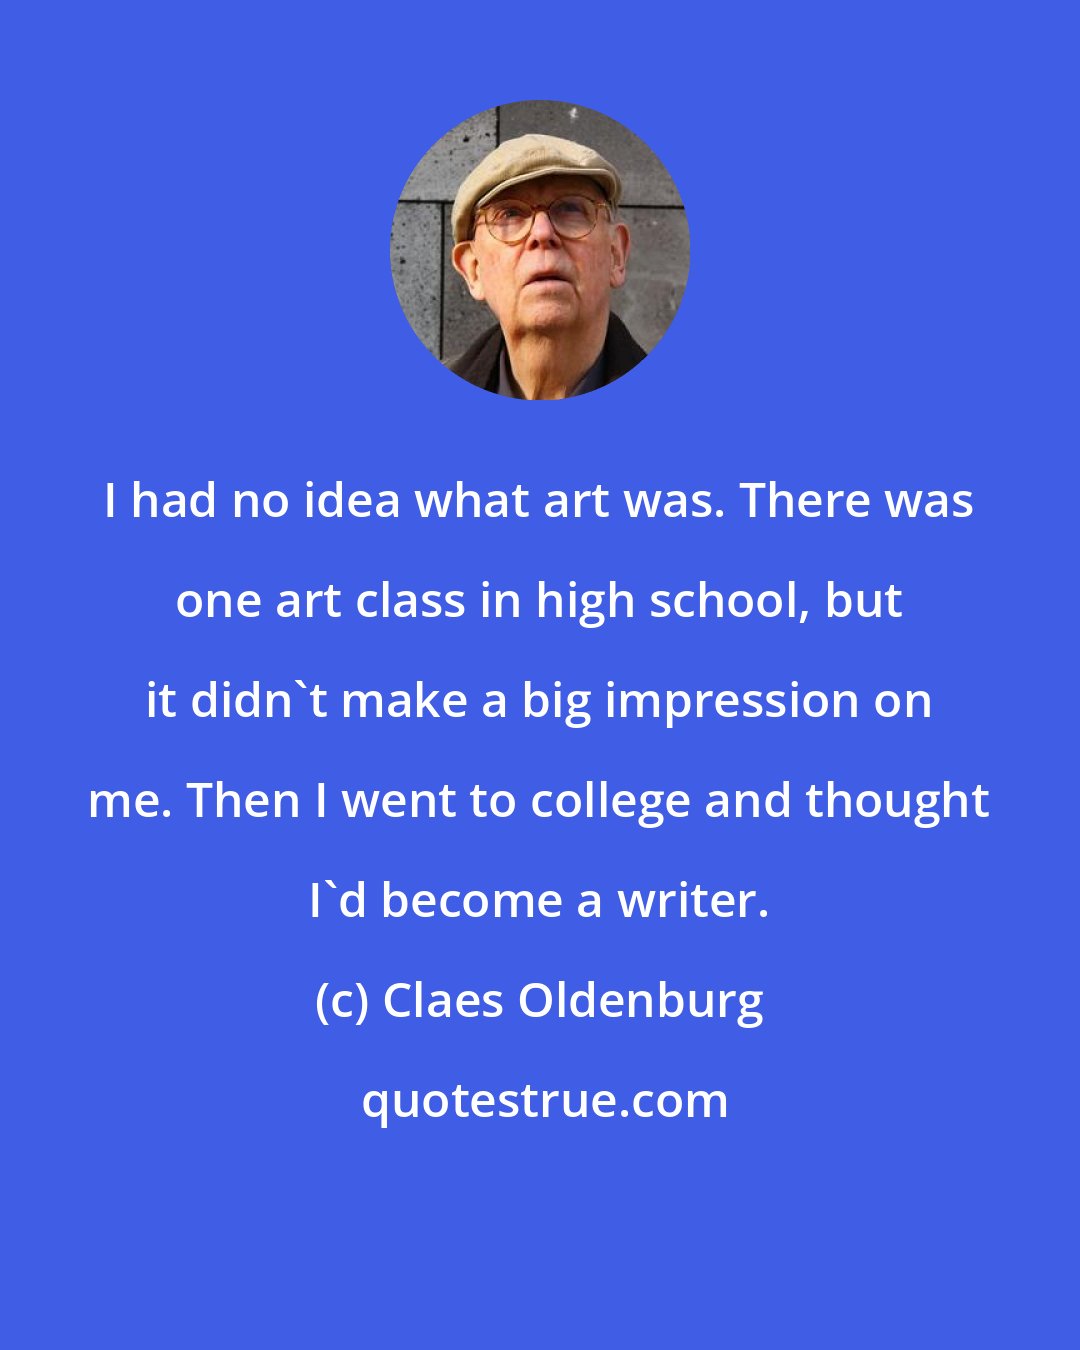 Claes Oldenburg: I had no idea what art was. There was one art class in high school, but it didn't make a big impression on me. Then I went to college and thought I'd become a writer.